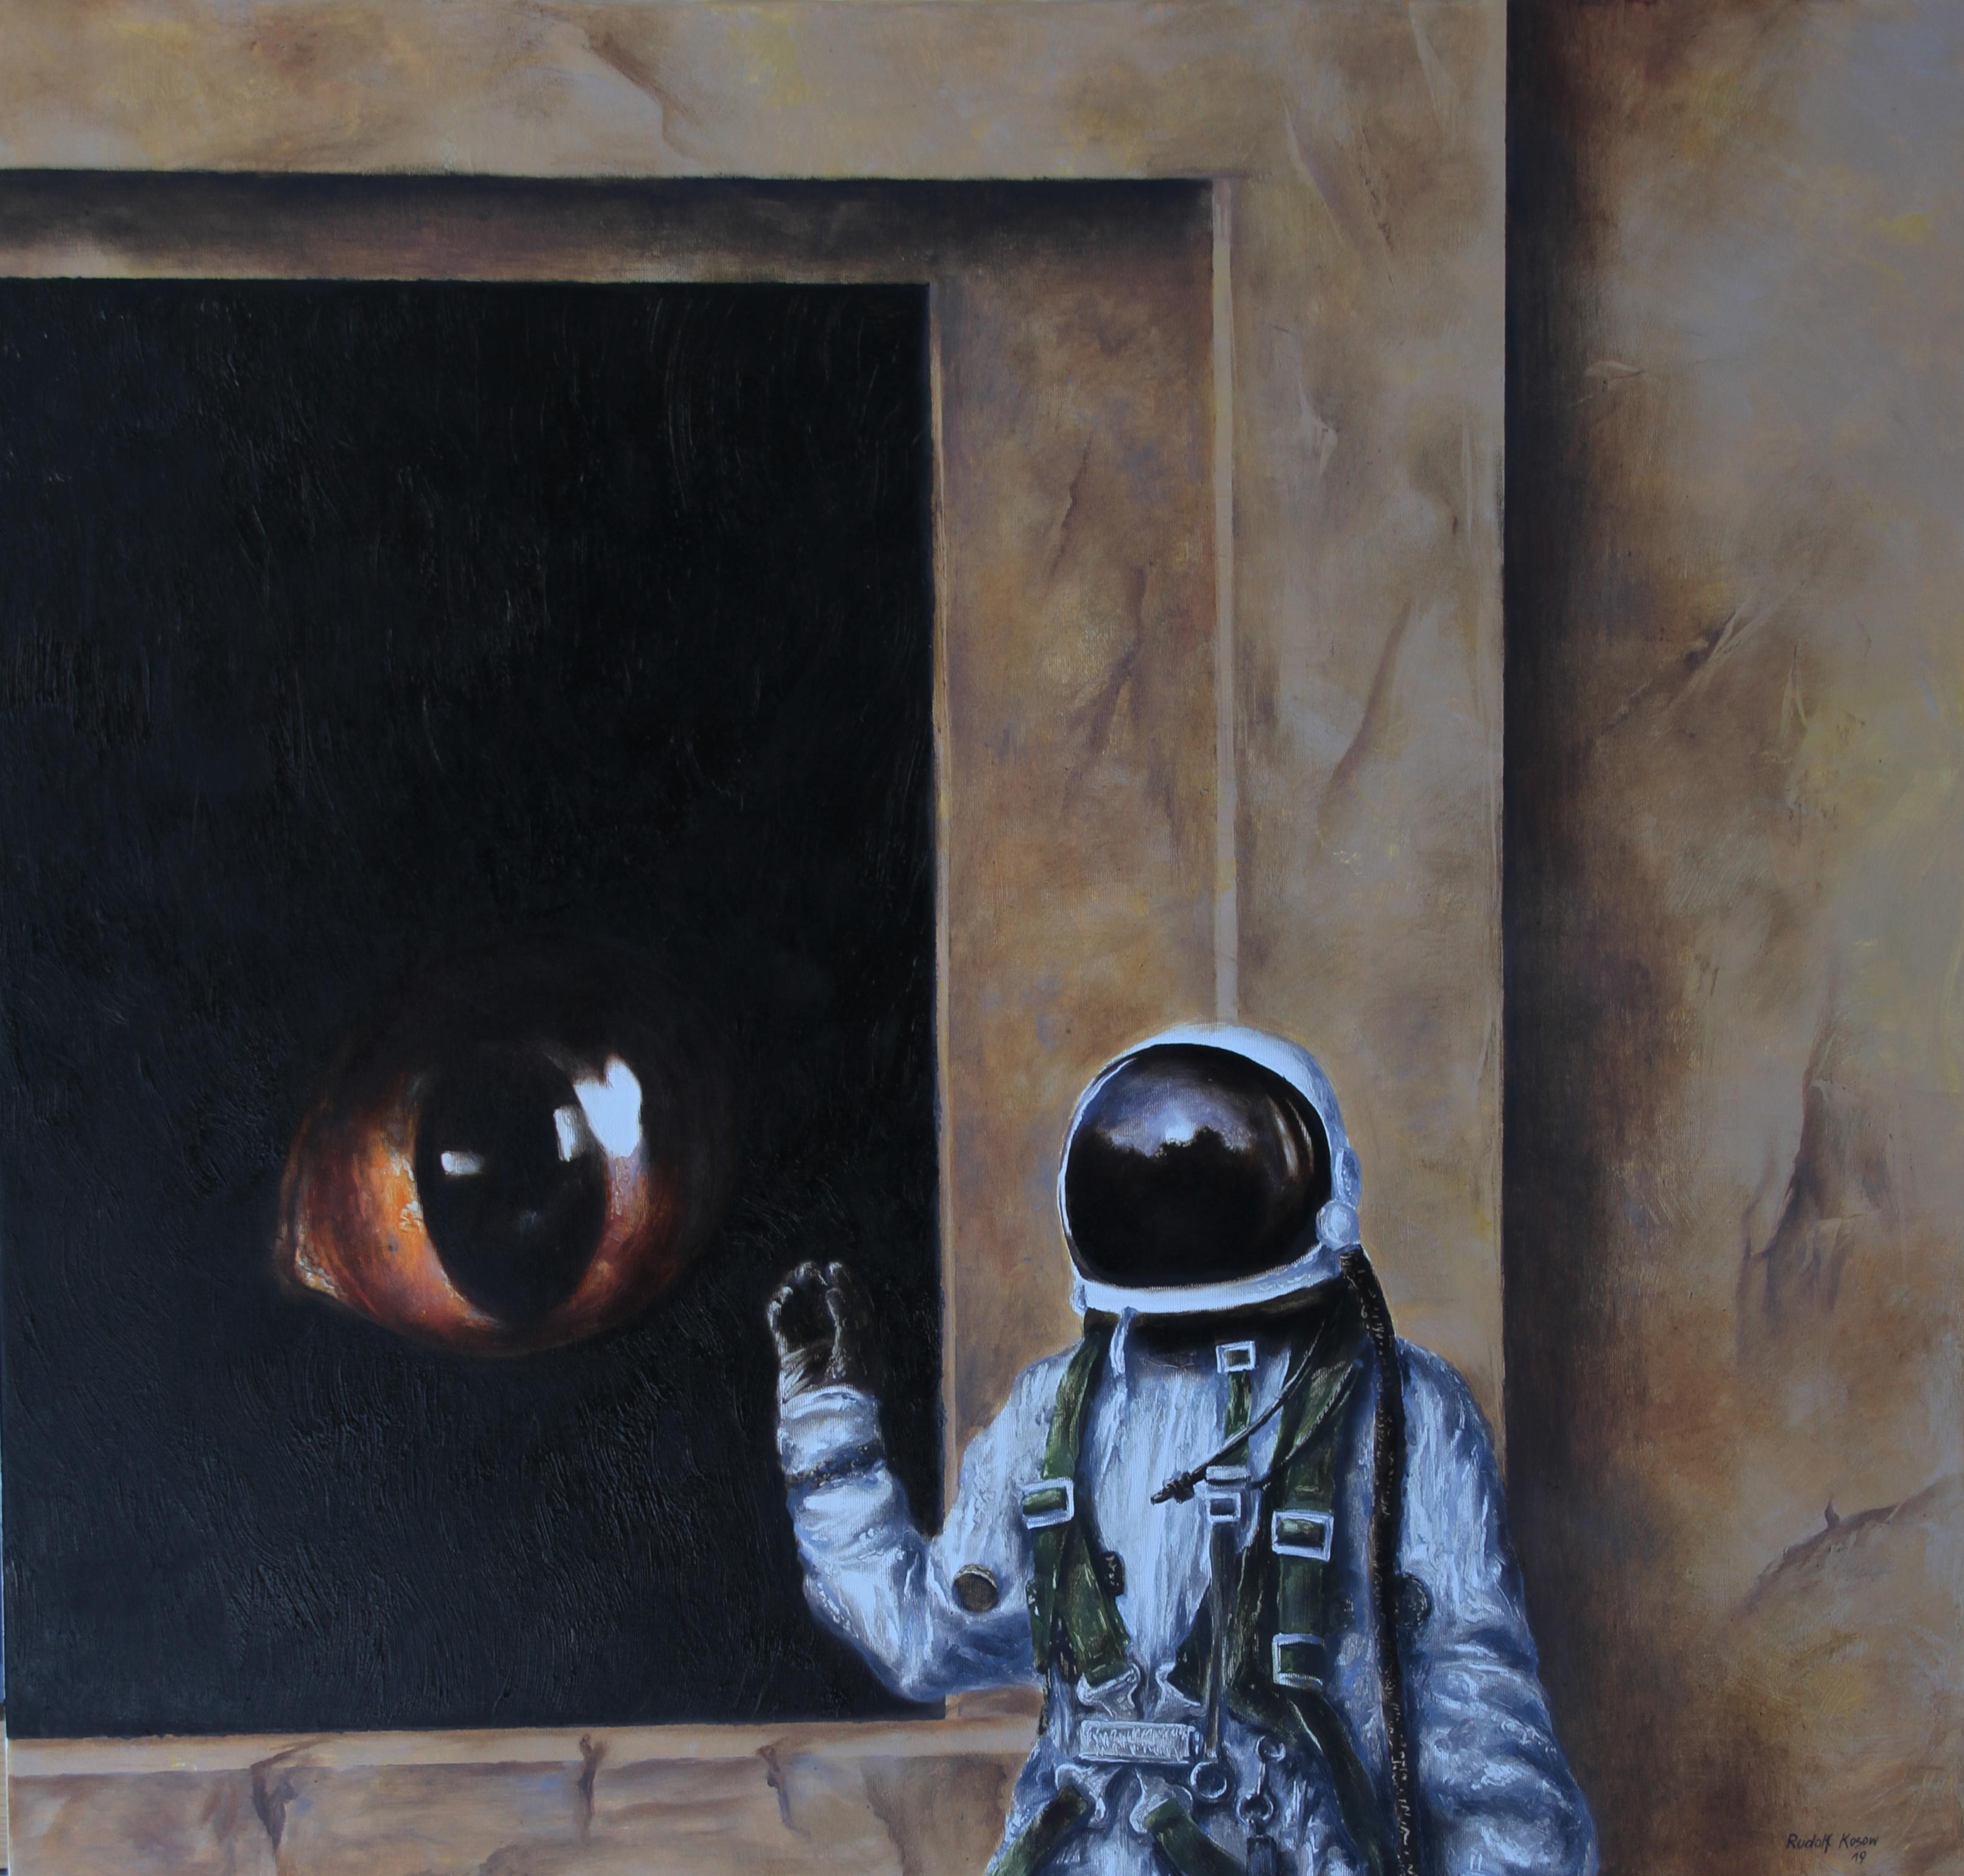 Contact (animal cat eye astronaut oil painting surrealist figurative mystery)